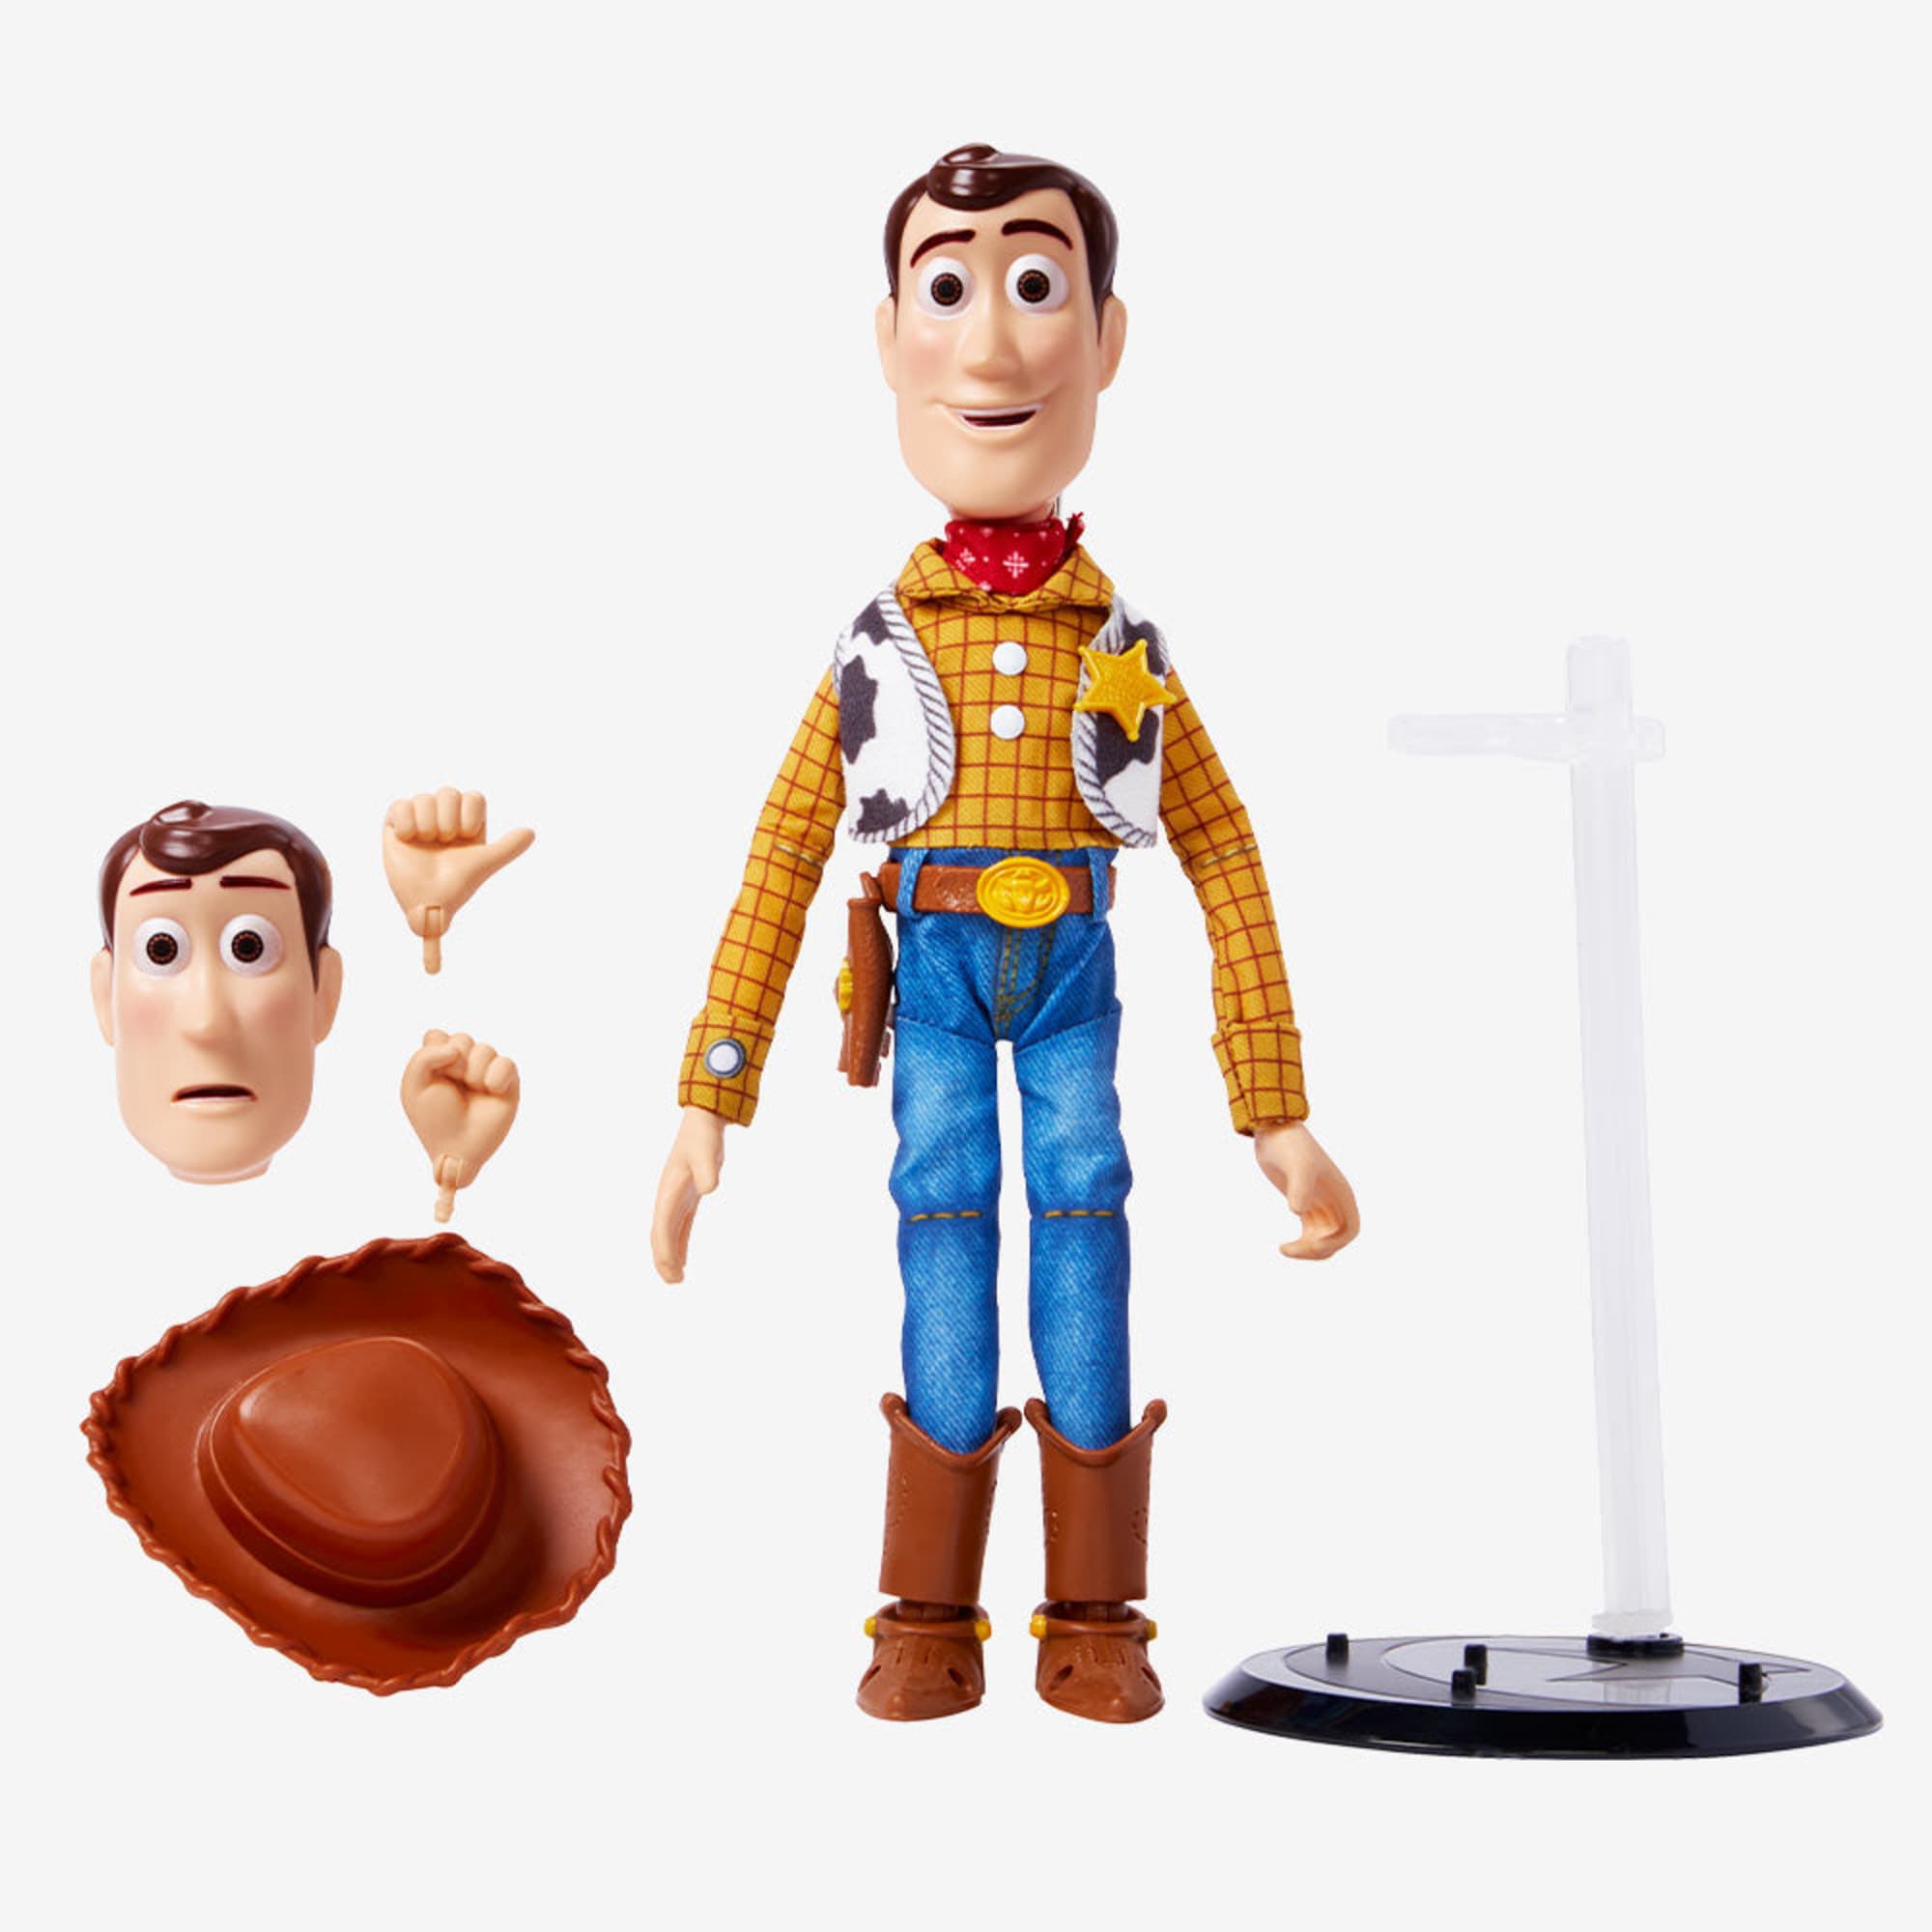 Mattel Pixar Spotlight Series Woody Figure, Disney Pixar Toy Story  Collectable, 9.2-in Tall with 2 Hand Sets, 2 Expressions, Articulation &  Display